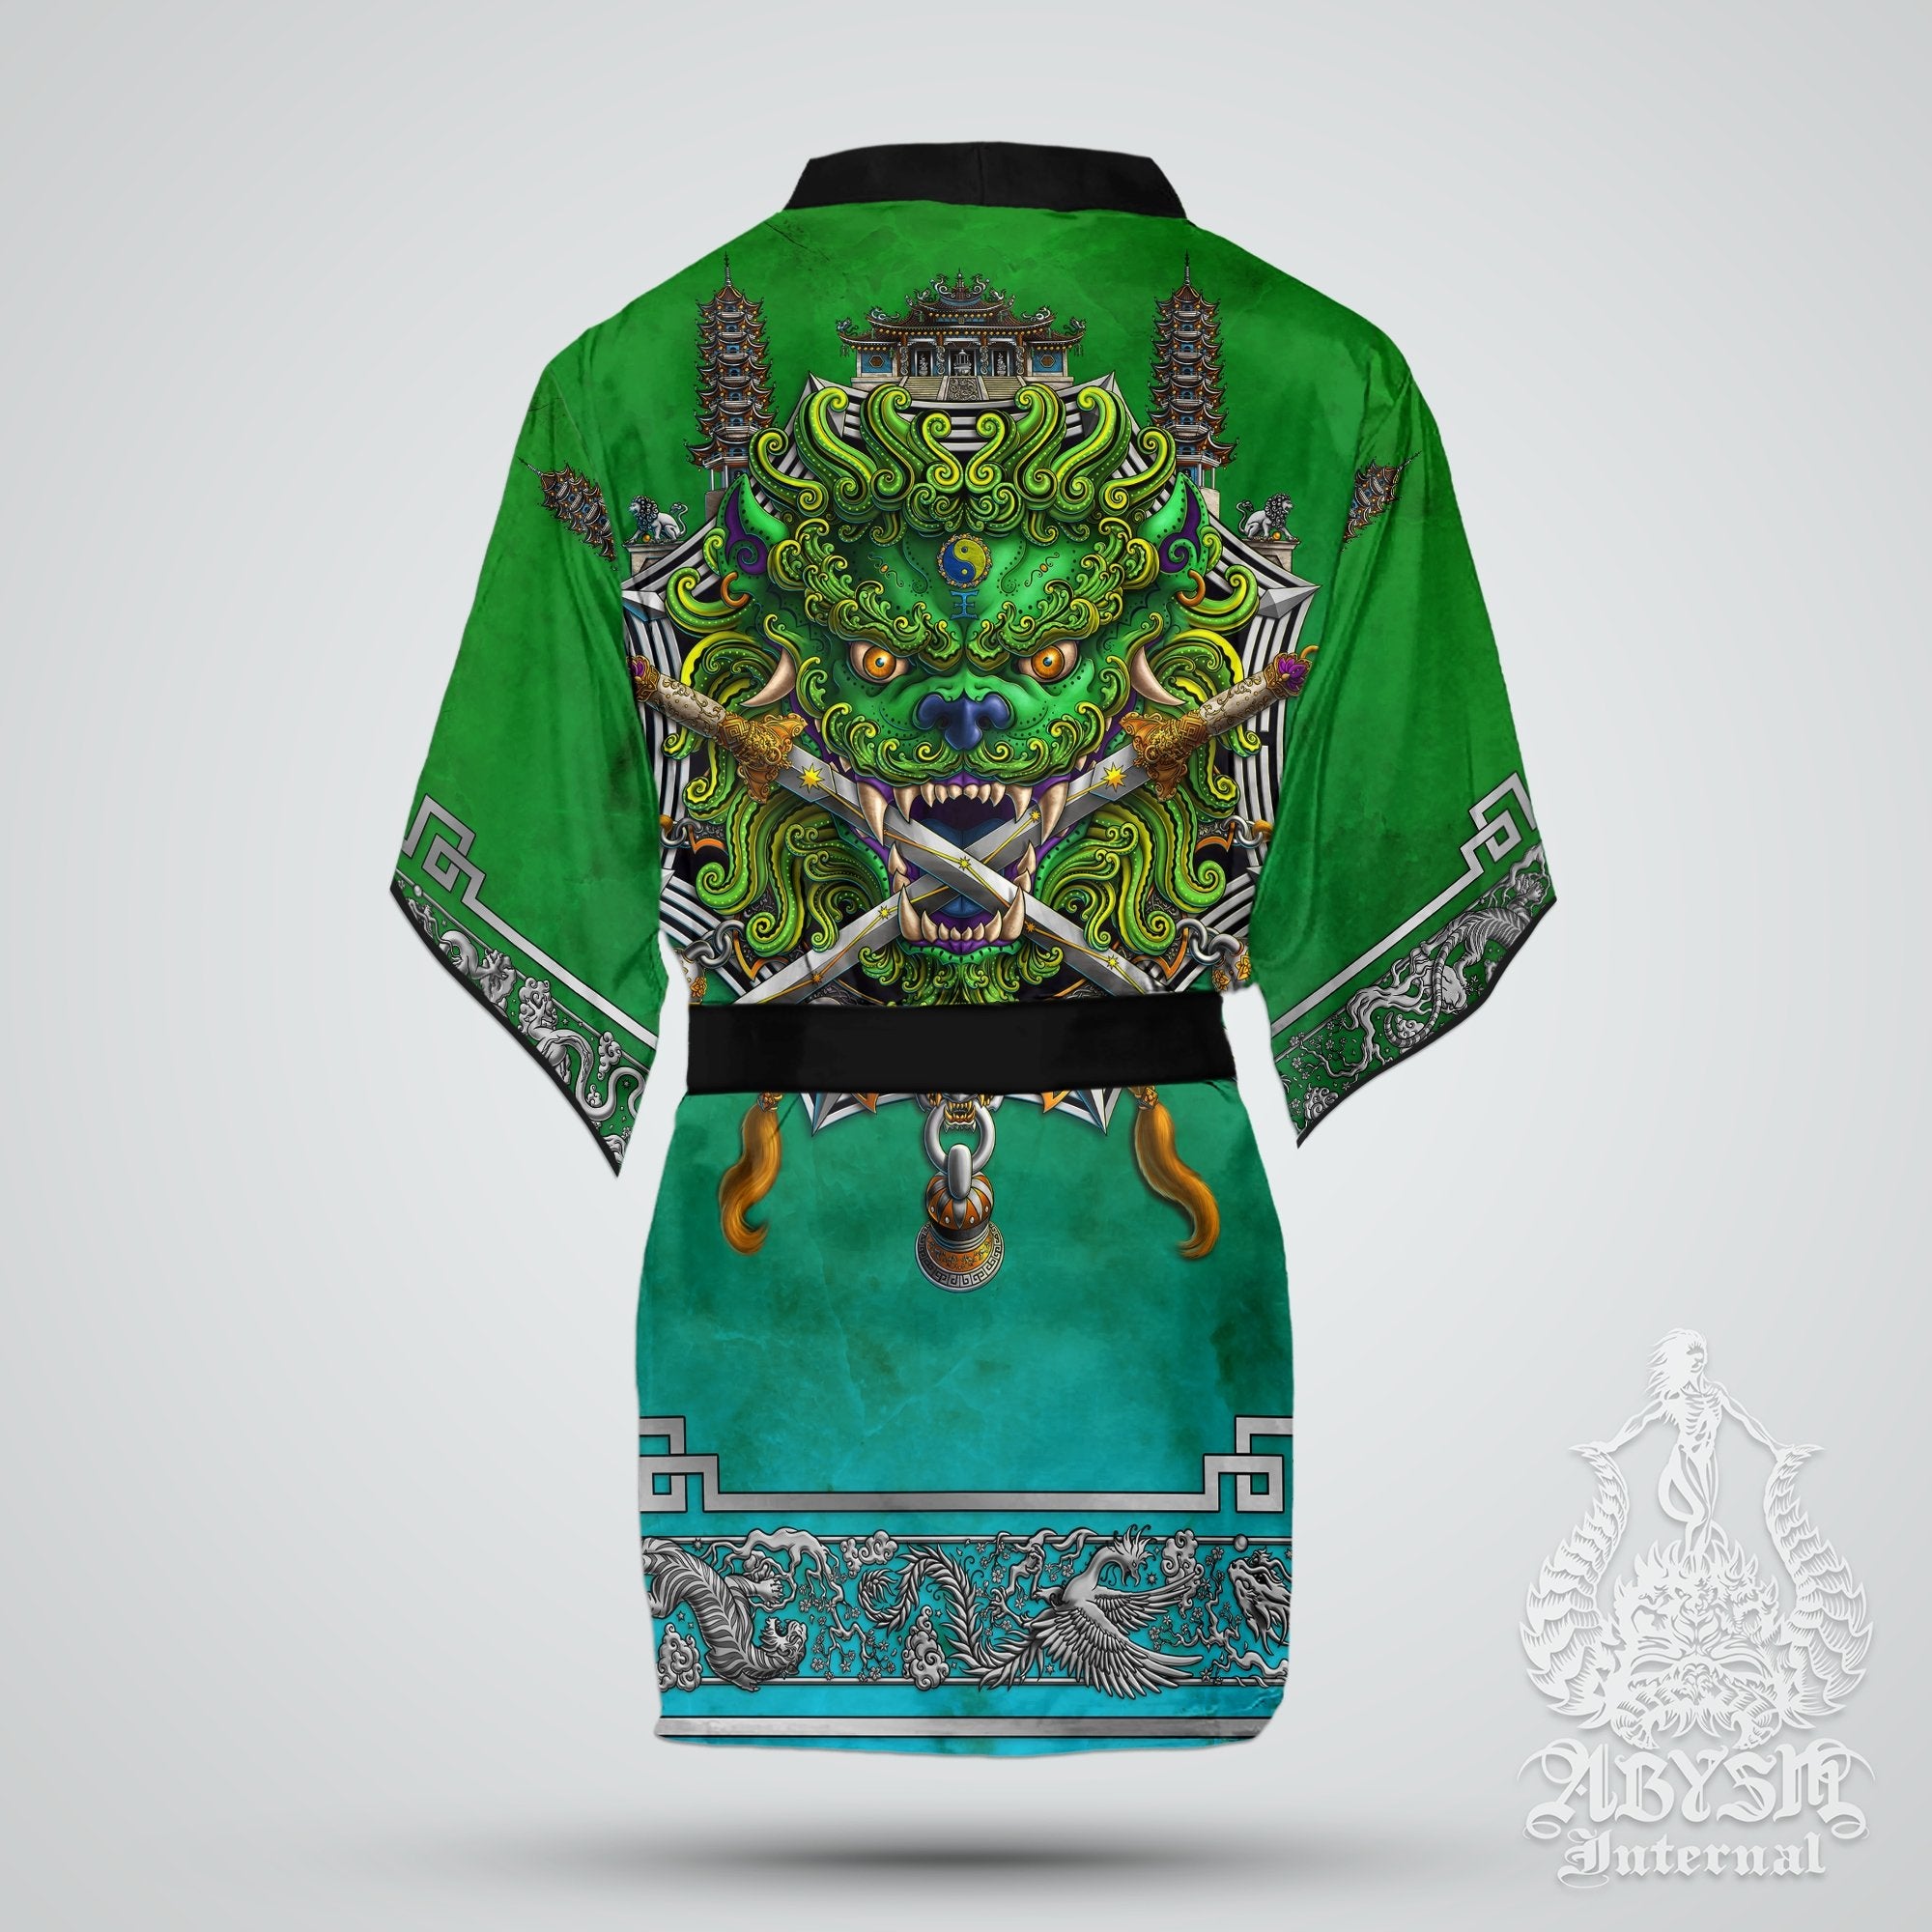 Sword Lion Cover Up, Beach Outfit, Chinese Party Kimono, Taiwan Summer Festival Robe, Asian Indie and Alternative Clothing, Unisex - Green - Abysm Internal